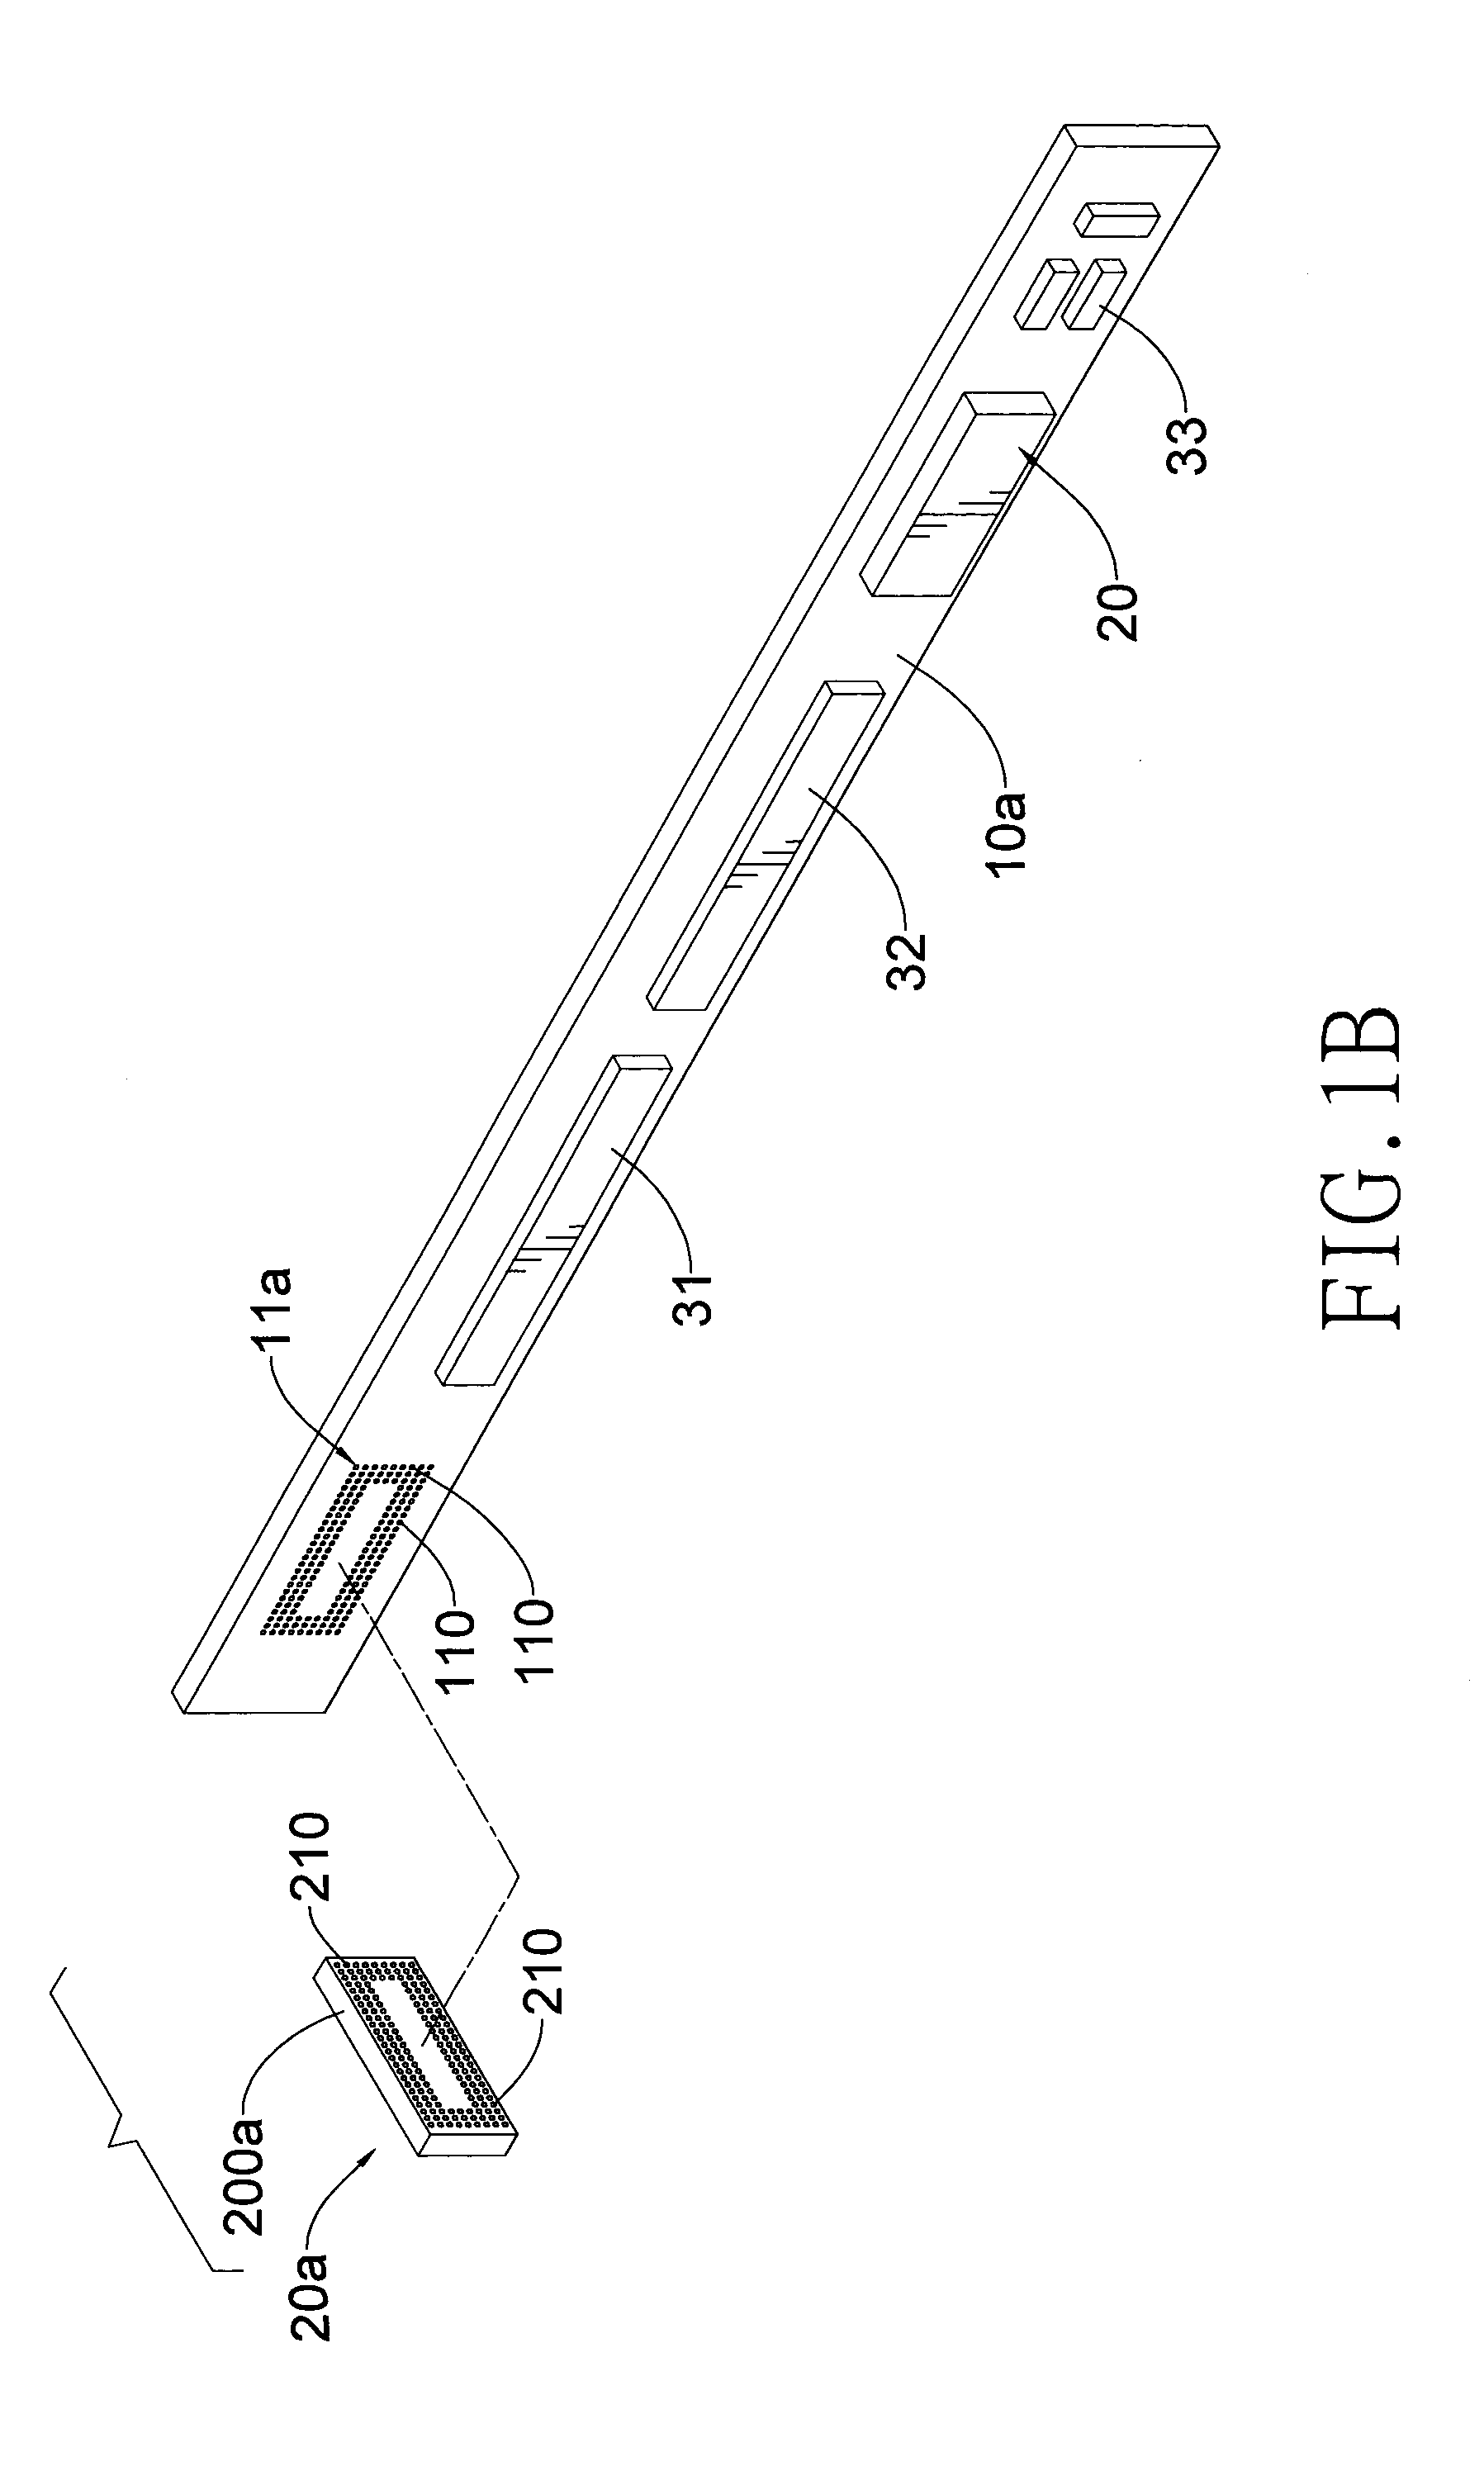 Screen control module of a mobile electronic device and controller thereof